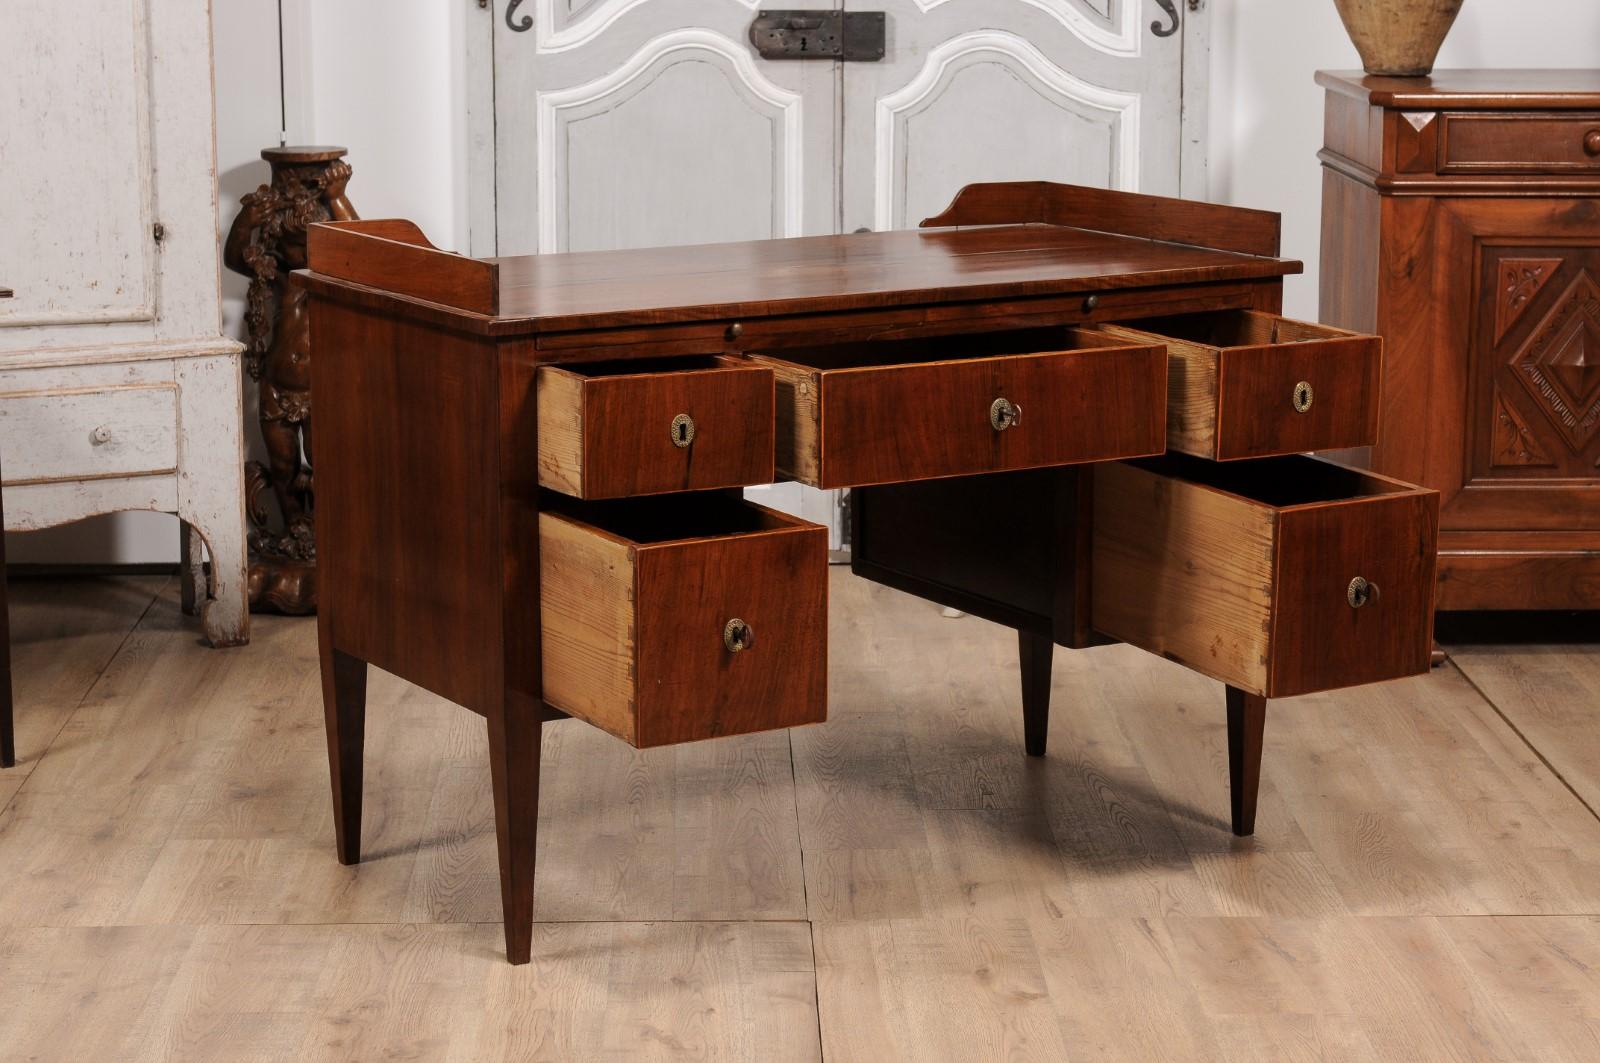 Italian 1820s Walnut and Mahogany Desk with Five Drawers, Pull-out and Banding For Sale 1